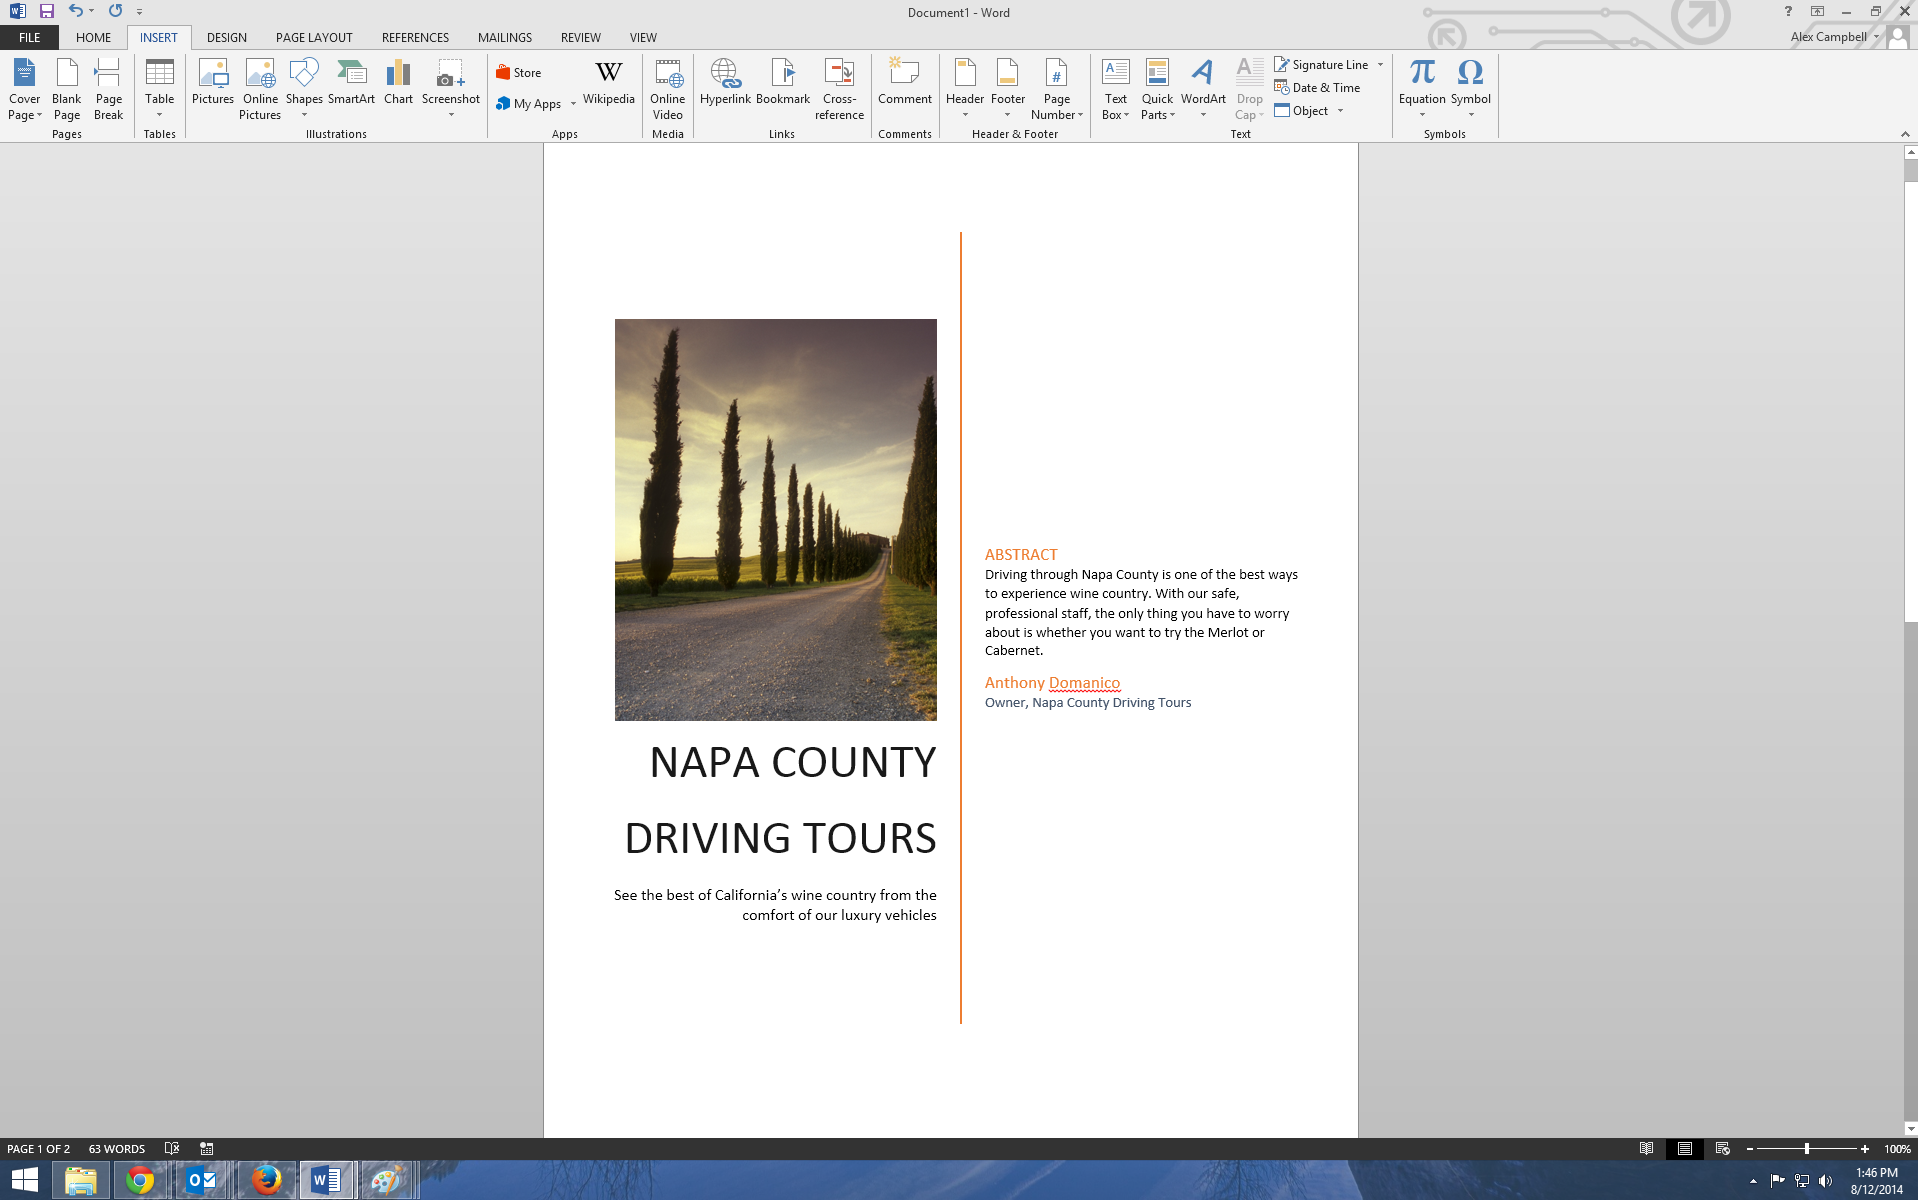 How To Add Page Numbers And A Table Of Contents To Word Documents